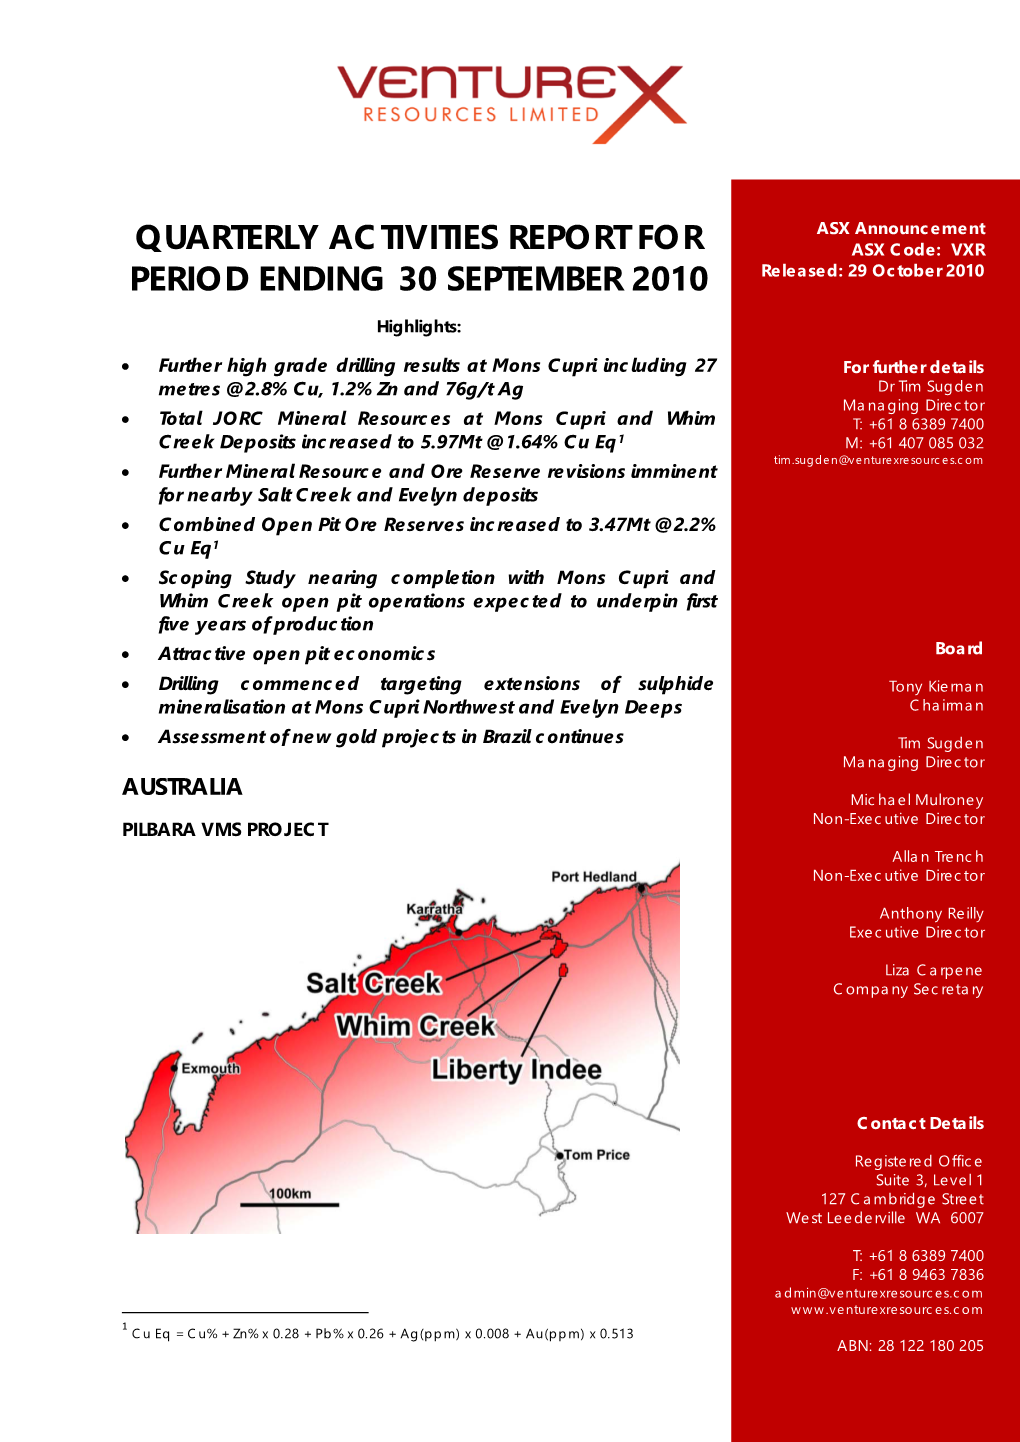 Quarterly Activities Report for Period Ending 30